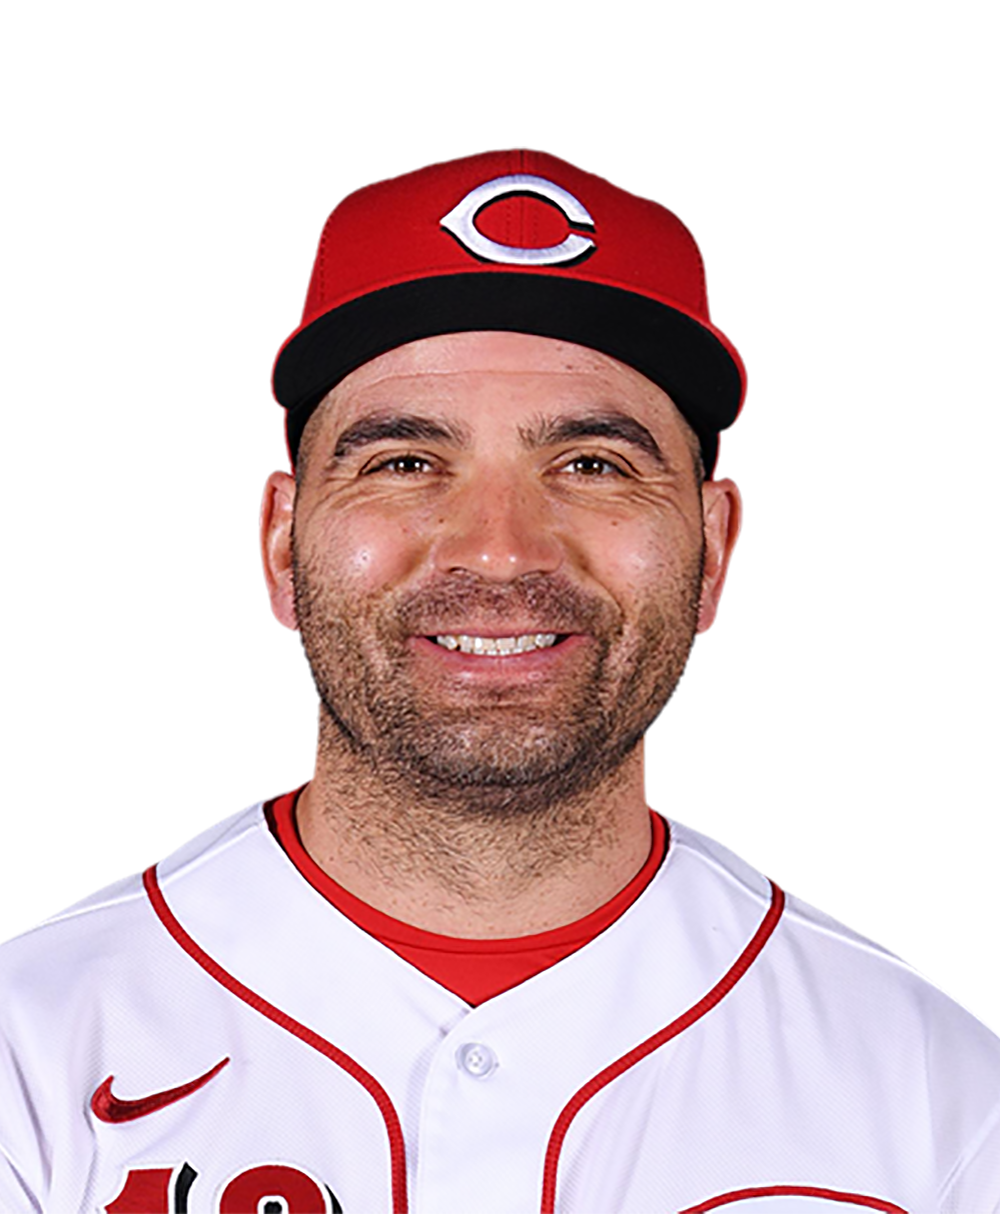 Reds' Joey Votto: 'I want to play againat least one more year